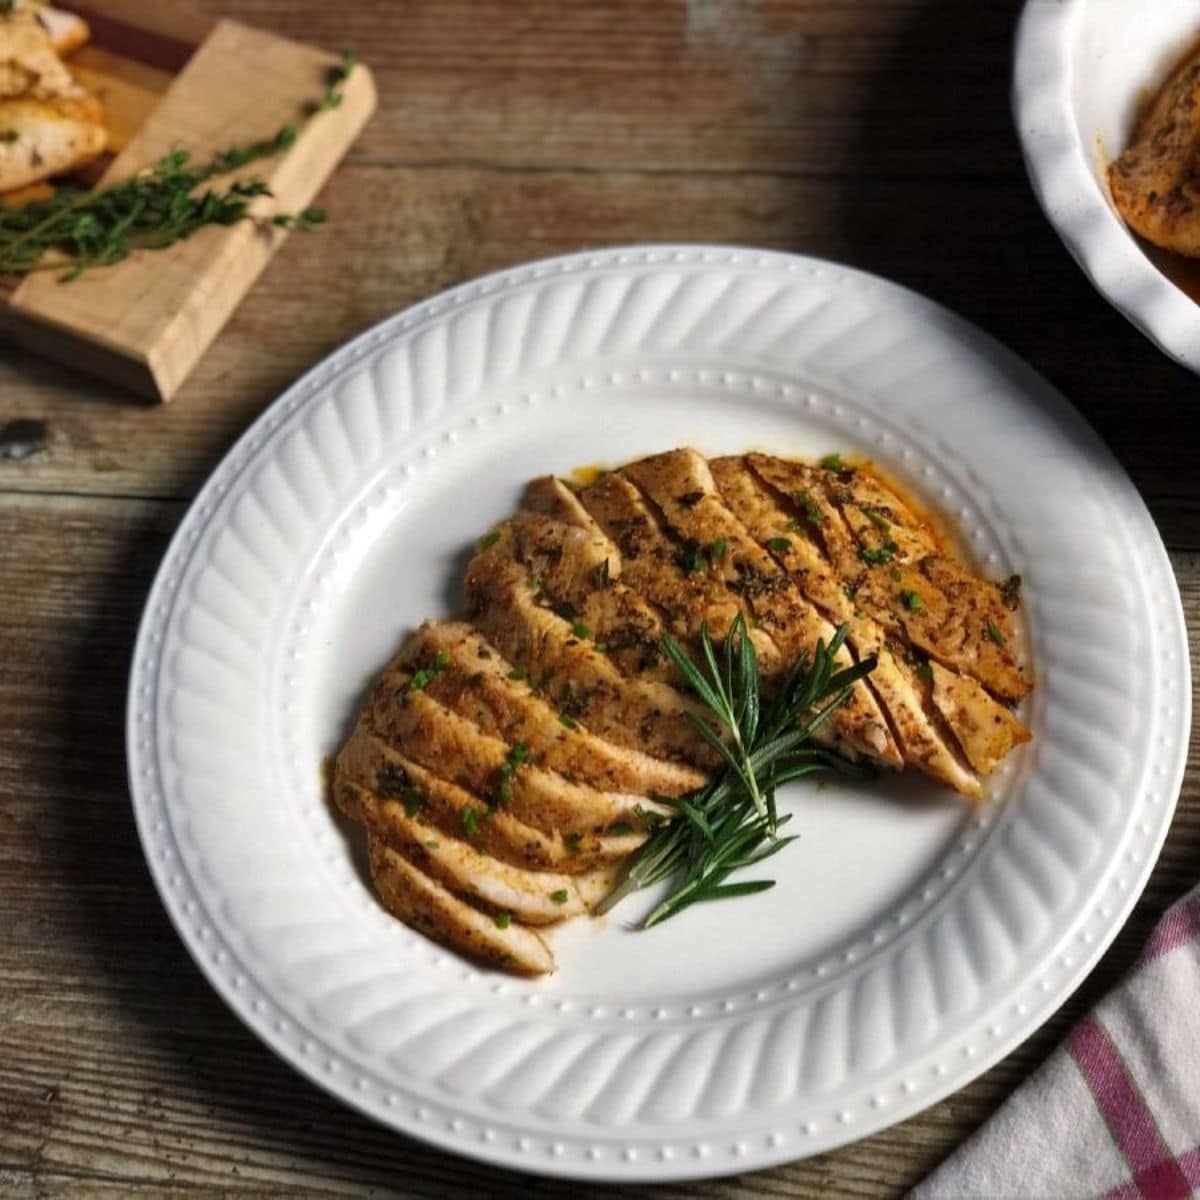 Baked garlic herb chicken breasts in a white plate.